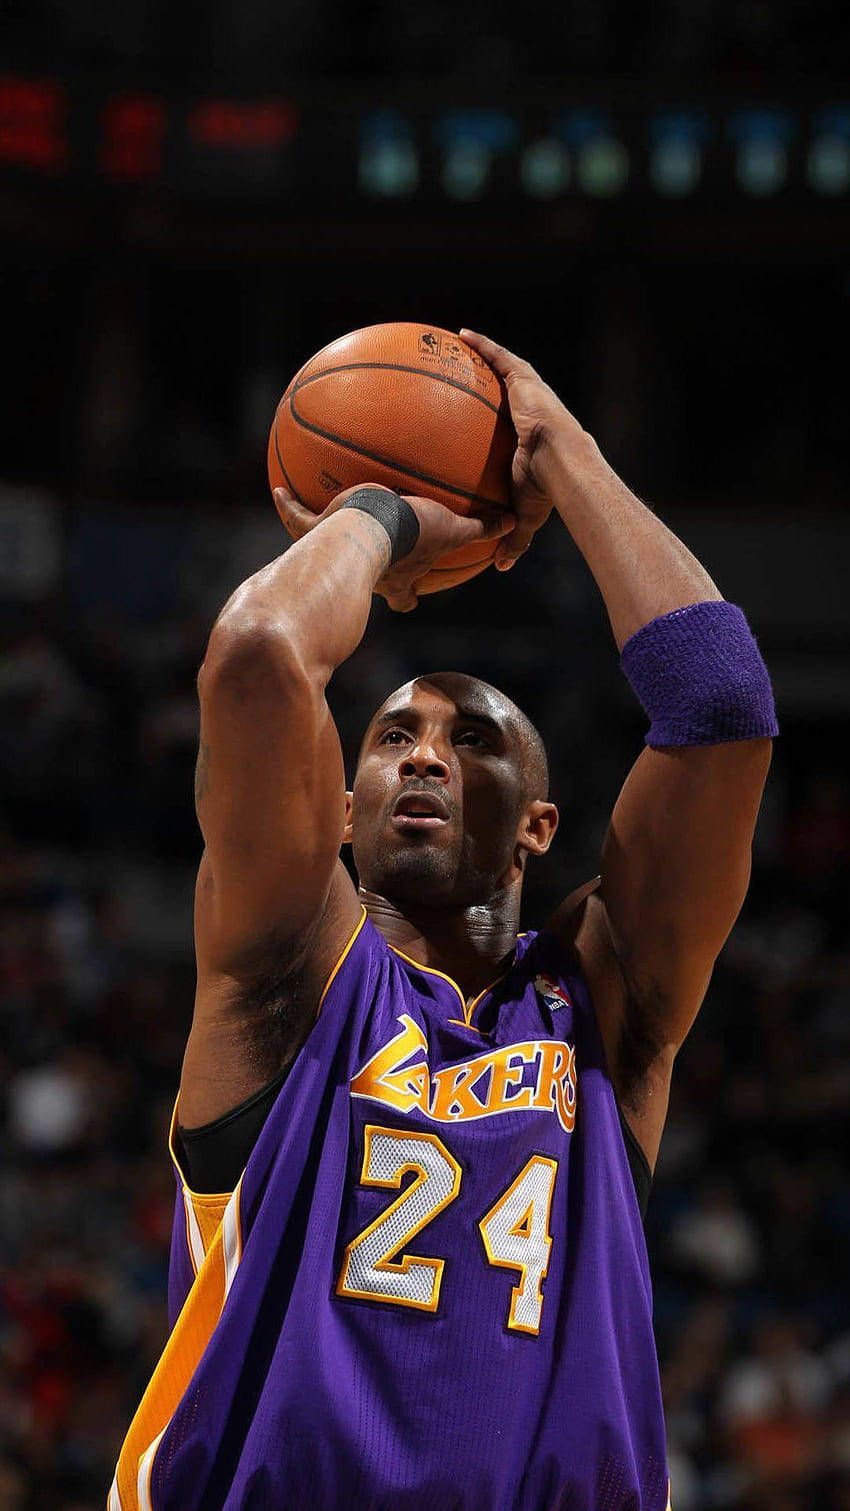 Kobe Bryant 24 Lakers iPhone Wallpaper with high-resolution 1080x1920 pixel. You can use this wallpaper for your iPhone 5, 6, 7, 8, X, XS, XR backgrounds, Mobile Screensaver, or iPad Lock Screen - Kobe Bryant